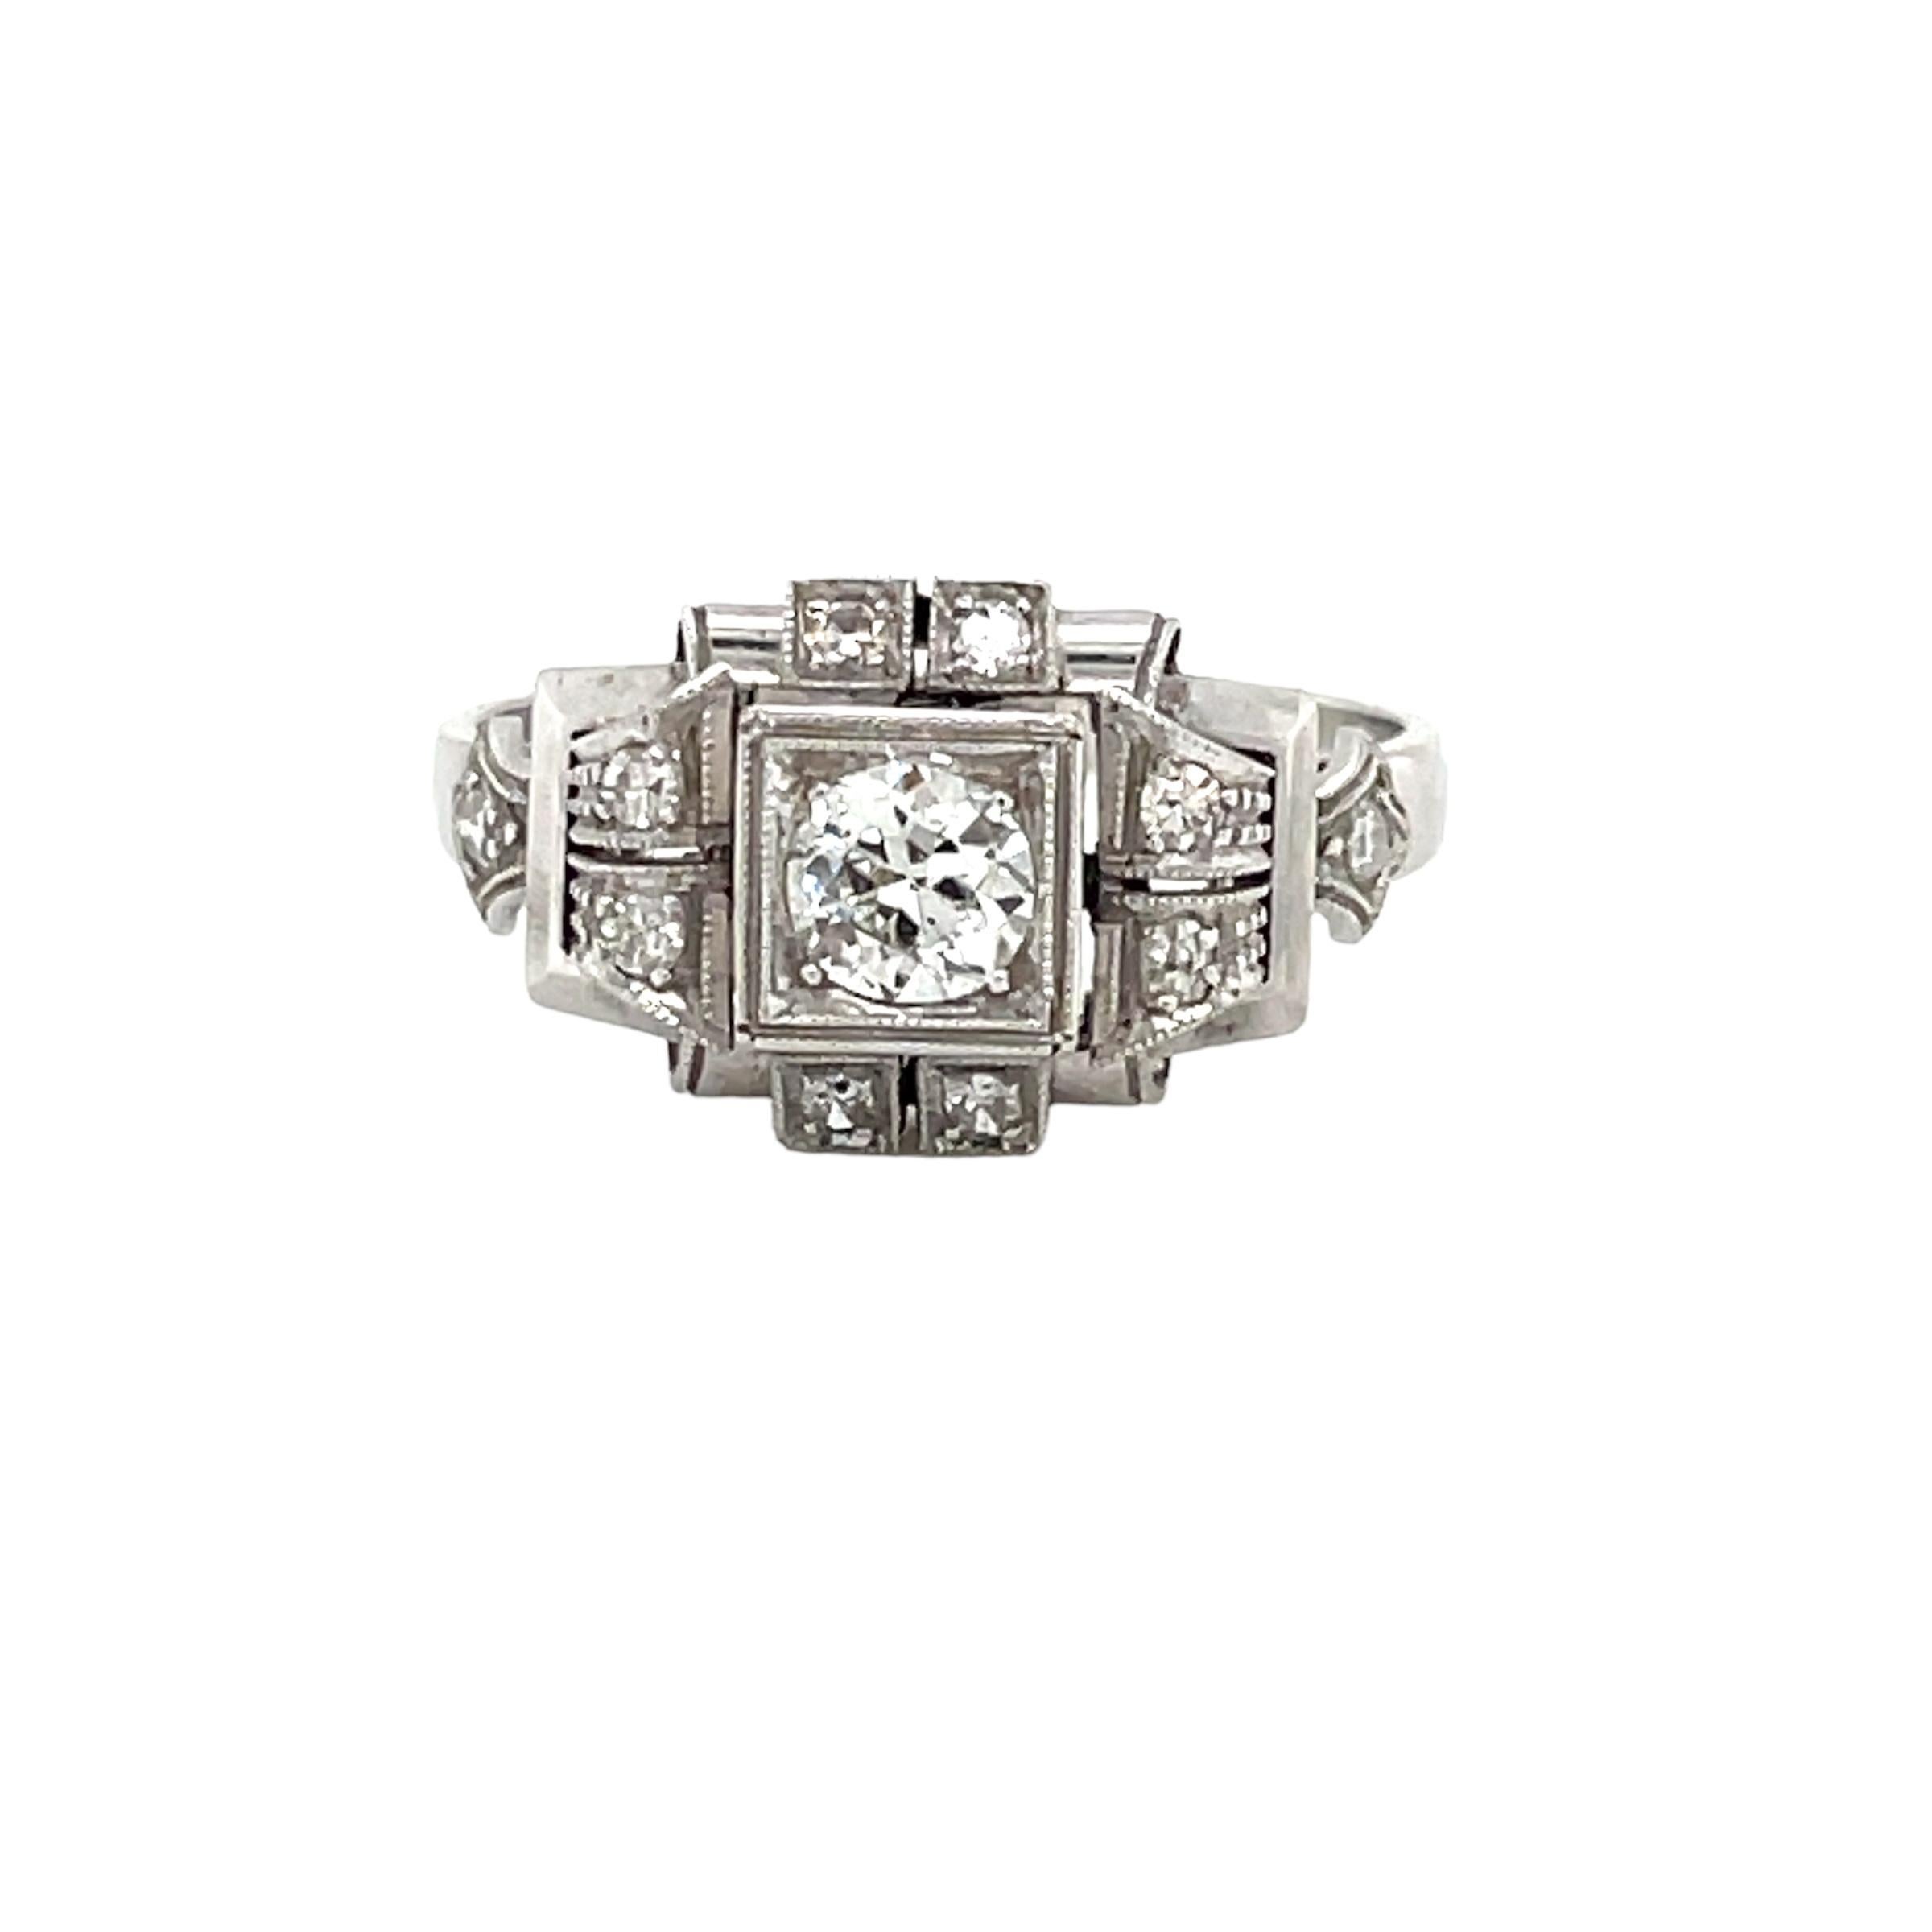 An exquisite Art Deco ring, hand-crafted in 18k white gold, authentic from 1930, featuring in the center sparkling Old mine-cut Diamond weighing .50 carat, surrounded by 0,30 carats of smaller diamonds.

The ring is original in every part and it